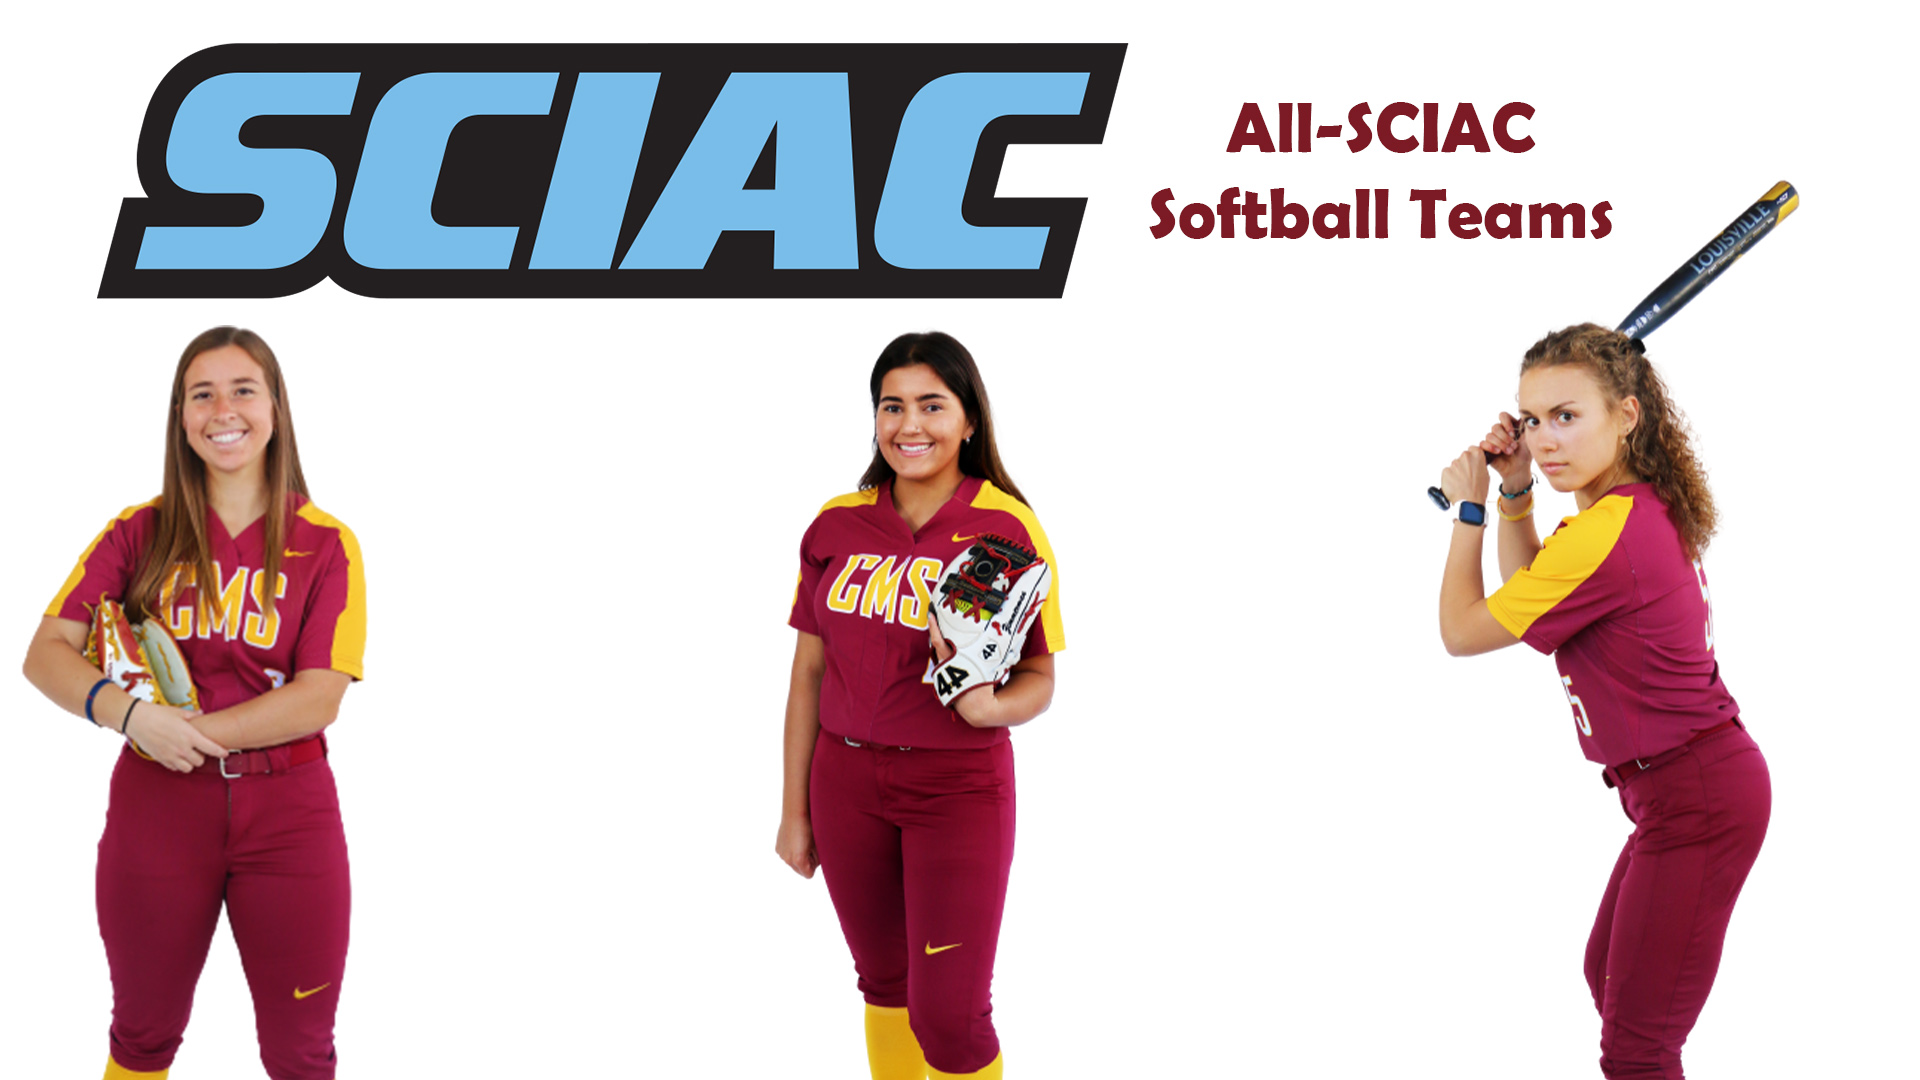 Posed shots of the SCIAC award winners with the SCIAC logo